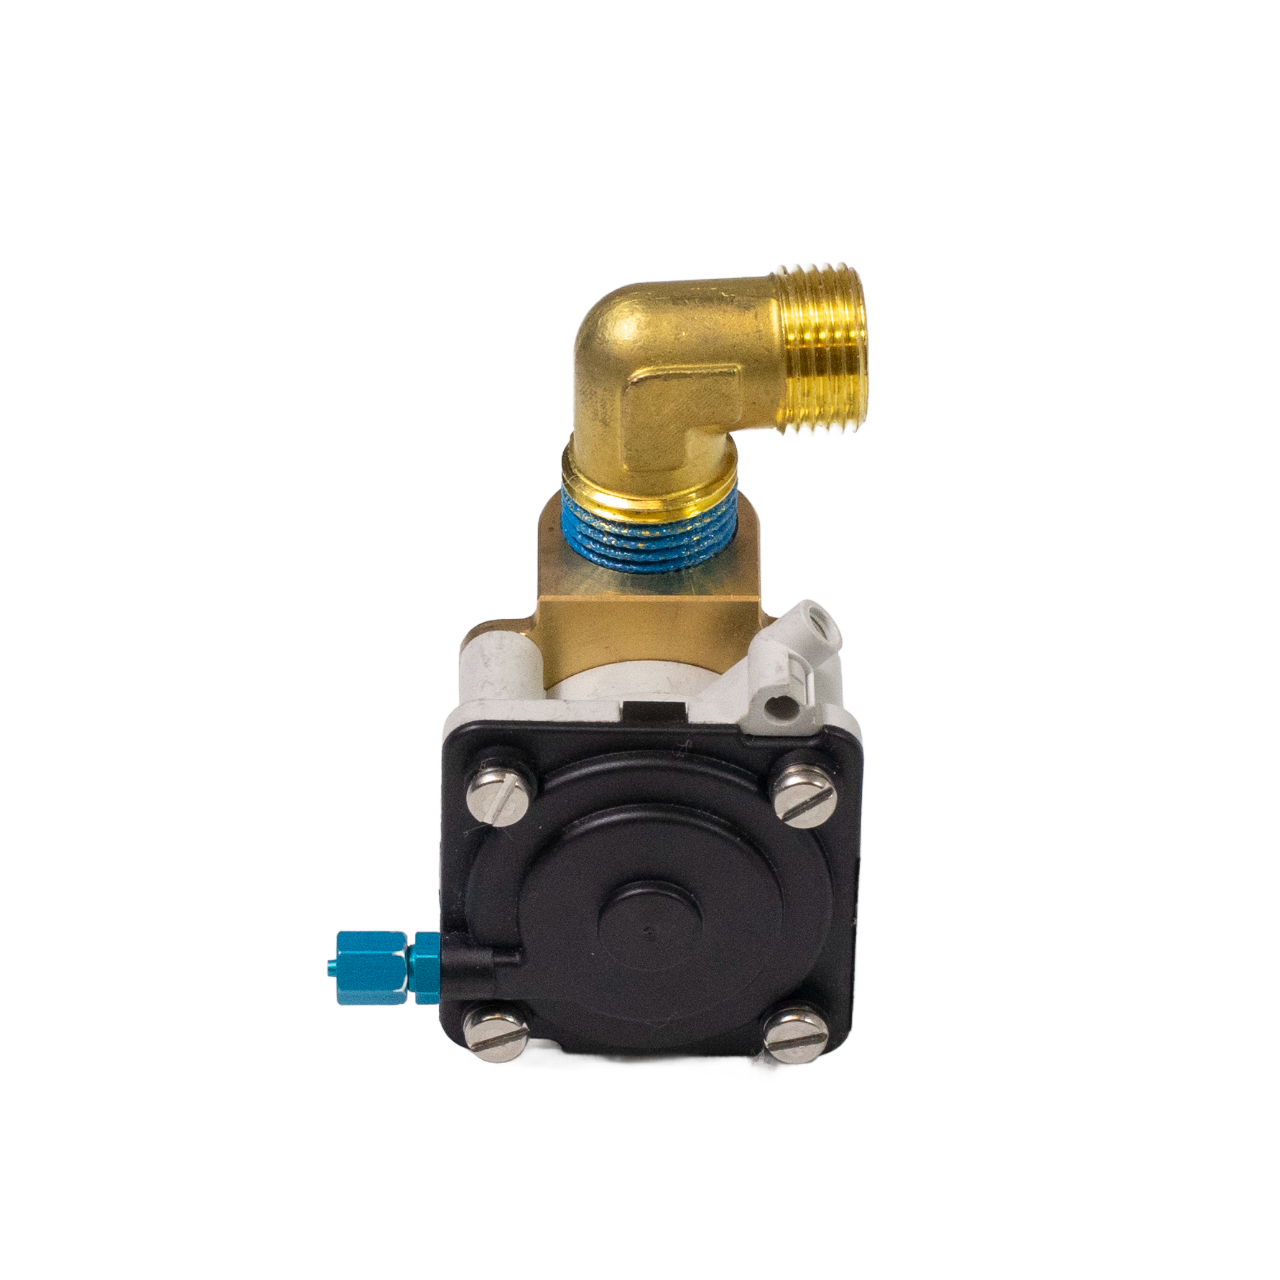 P5015C - Valve for Foot Operated Sanispray Washfountains with Copper Manifold  Intersan/AquaDesign